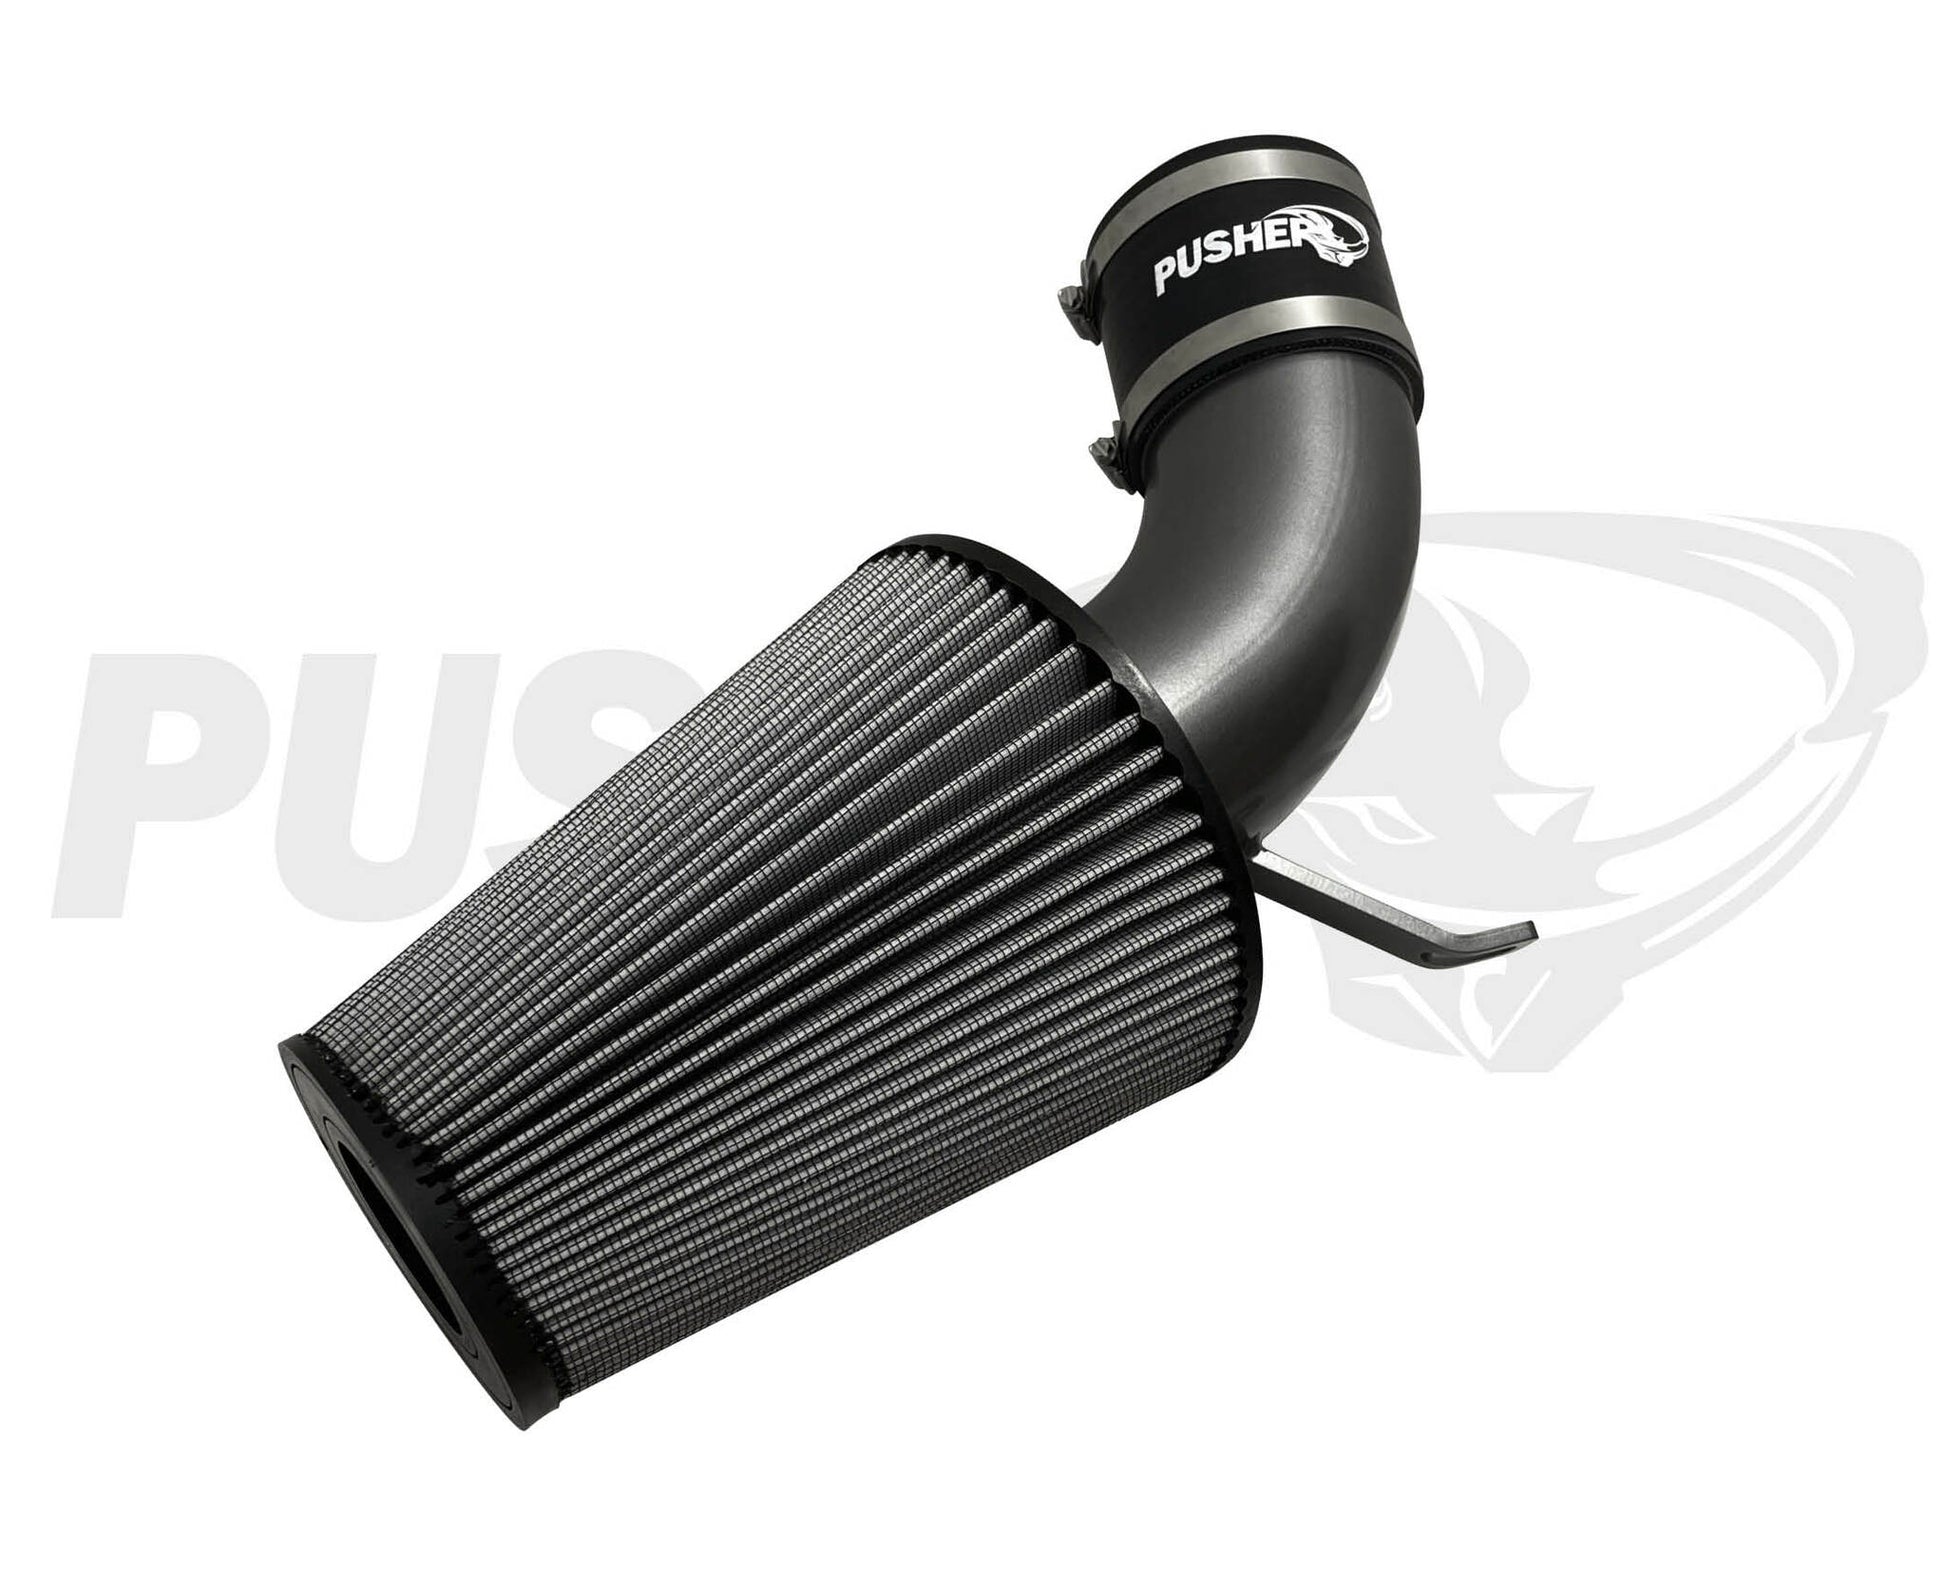 PDC9193CAI_U PDC9193CAI_W PDC9193CAI_R PDC9193CAI_K PDC9193CAI PDC9193CAI_G PDC9193CAI_N Pusher Front Mount Cold Air Intake System for 1991-1993 Intercooled Dodge Cummins Hell On Wheels Ltd Canada